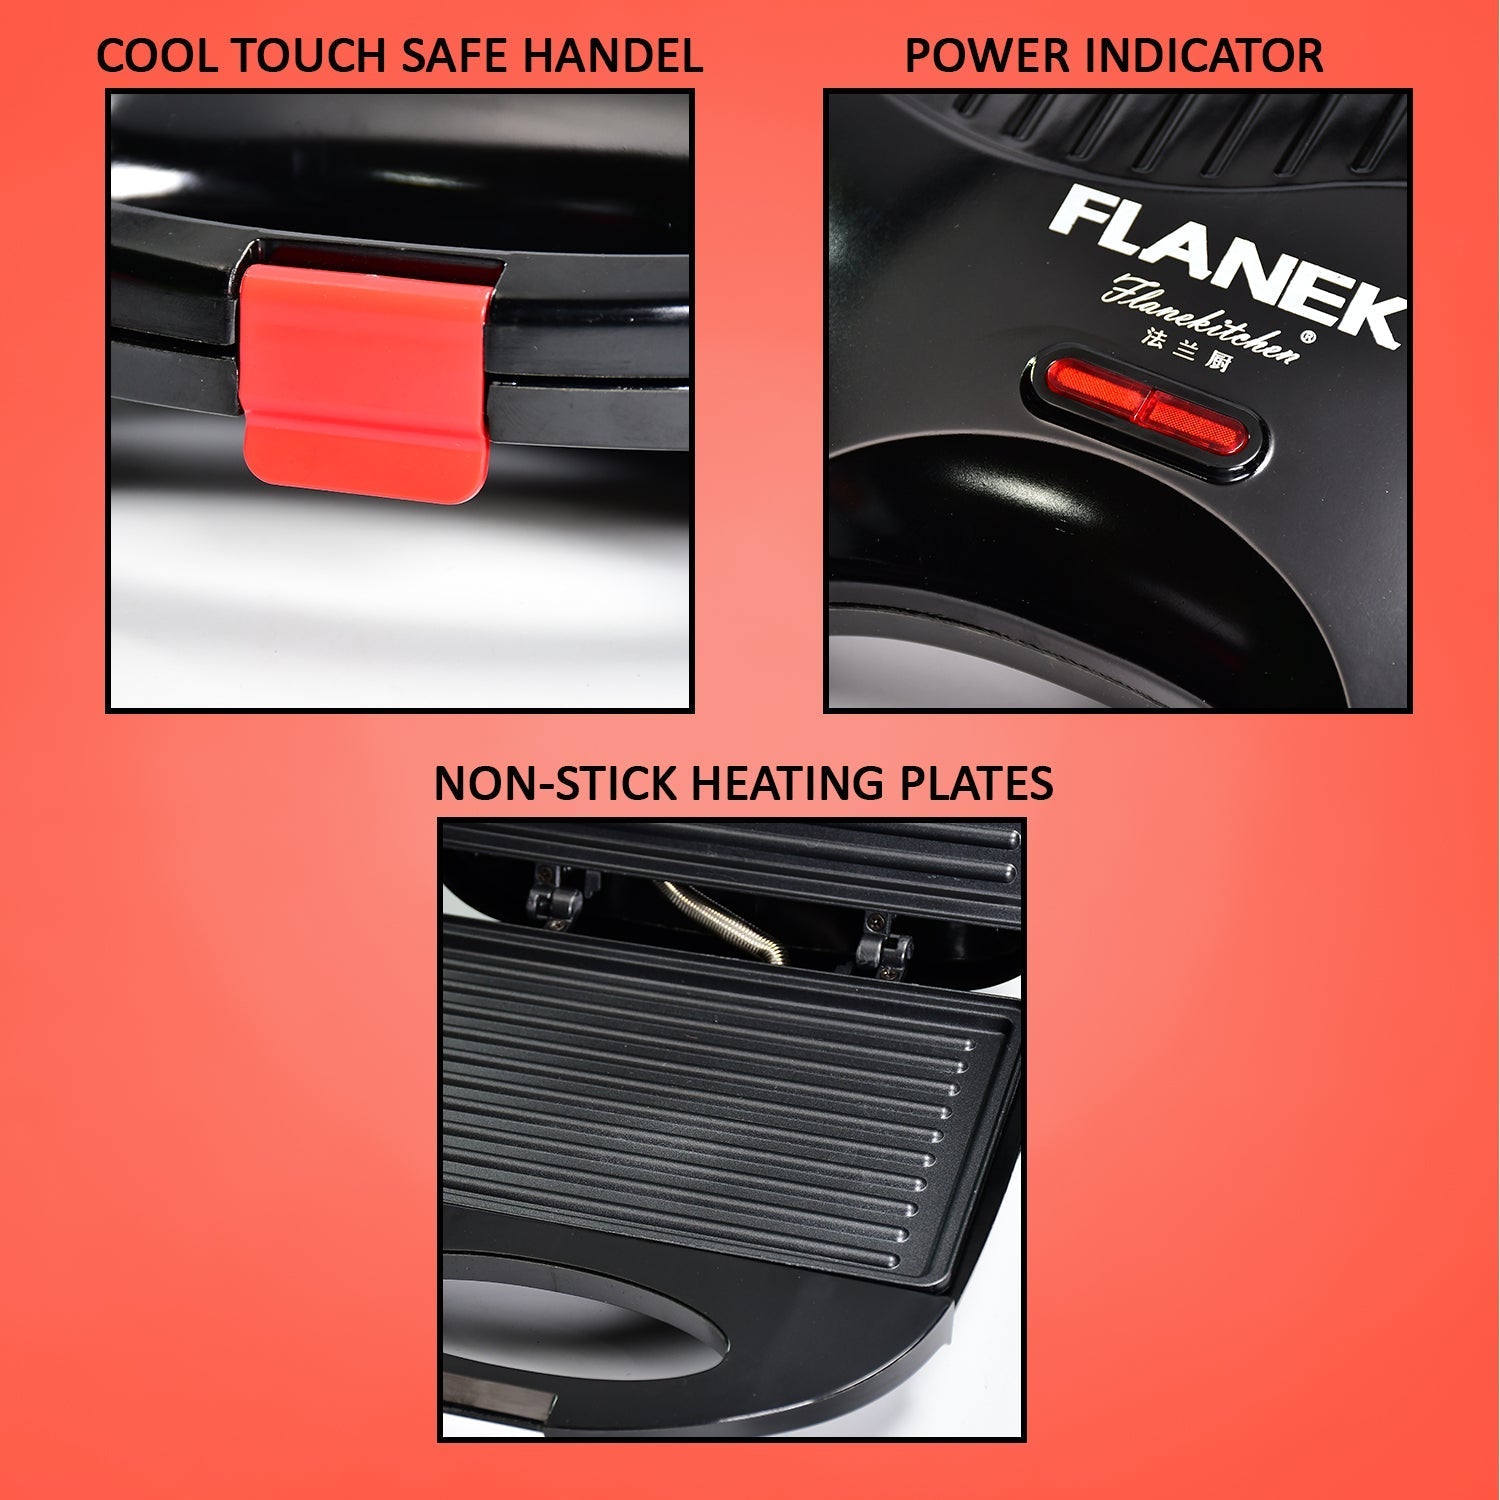 2818 Sandwich Maker Makes Sandwich Non-Stick Plates| Easy to Use with Indicator Lights 